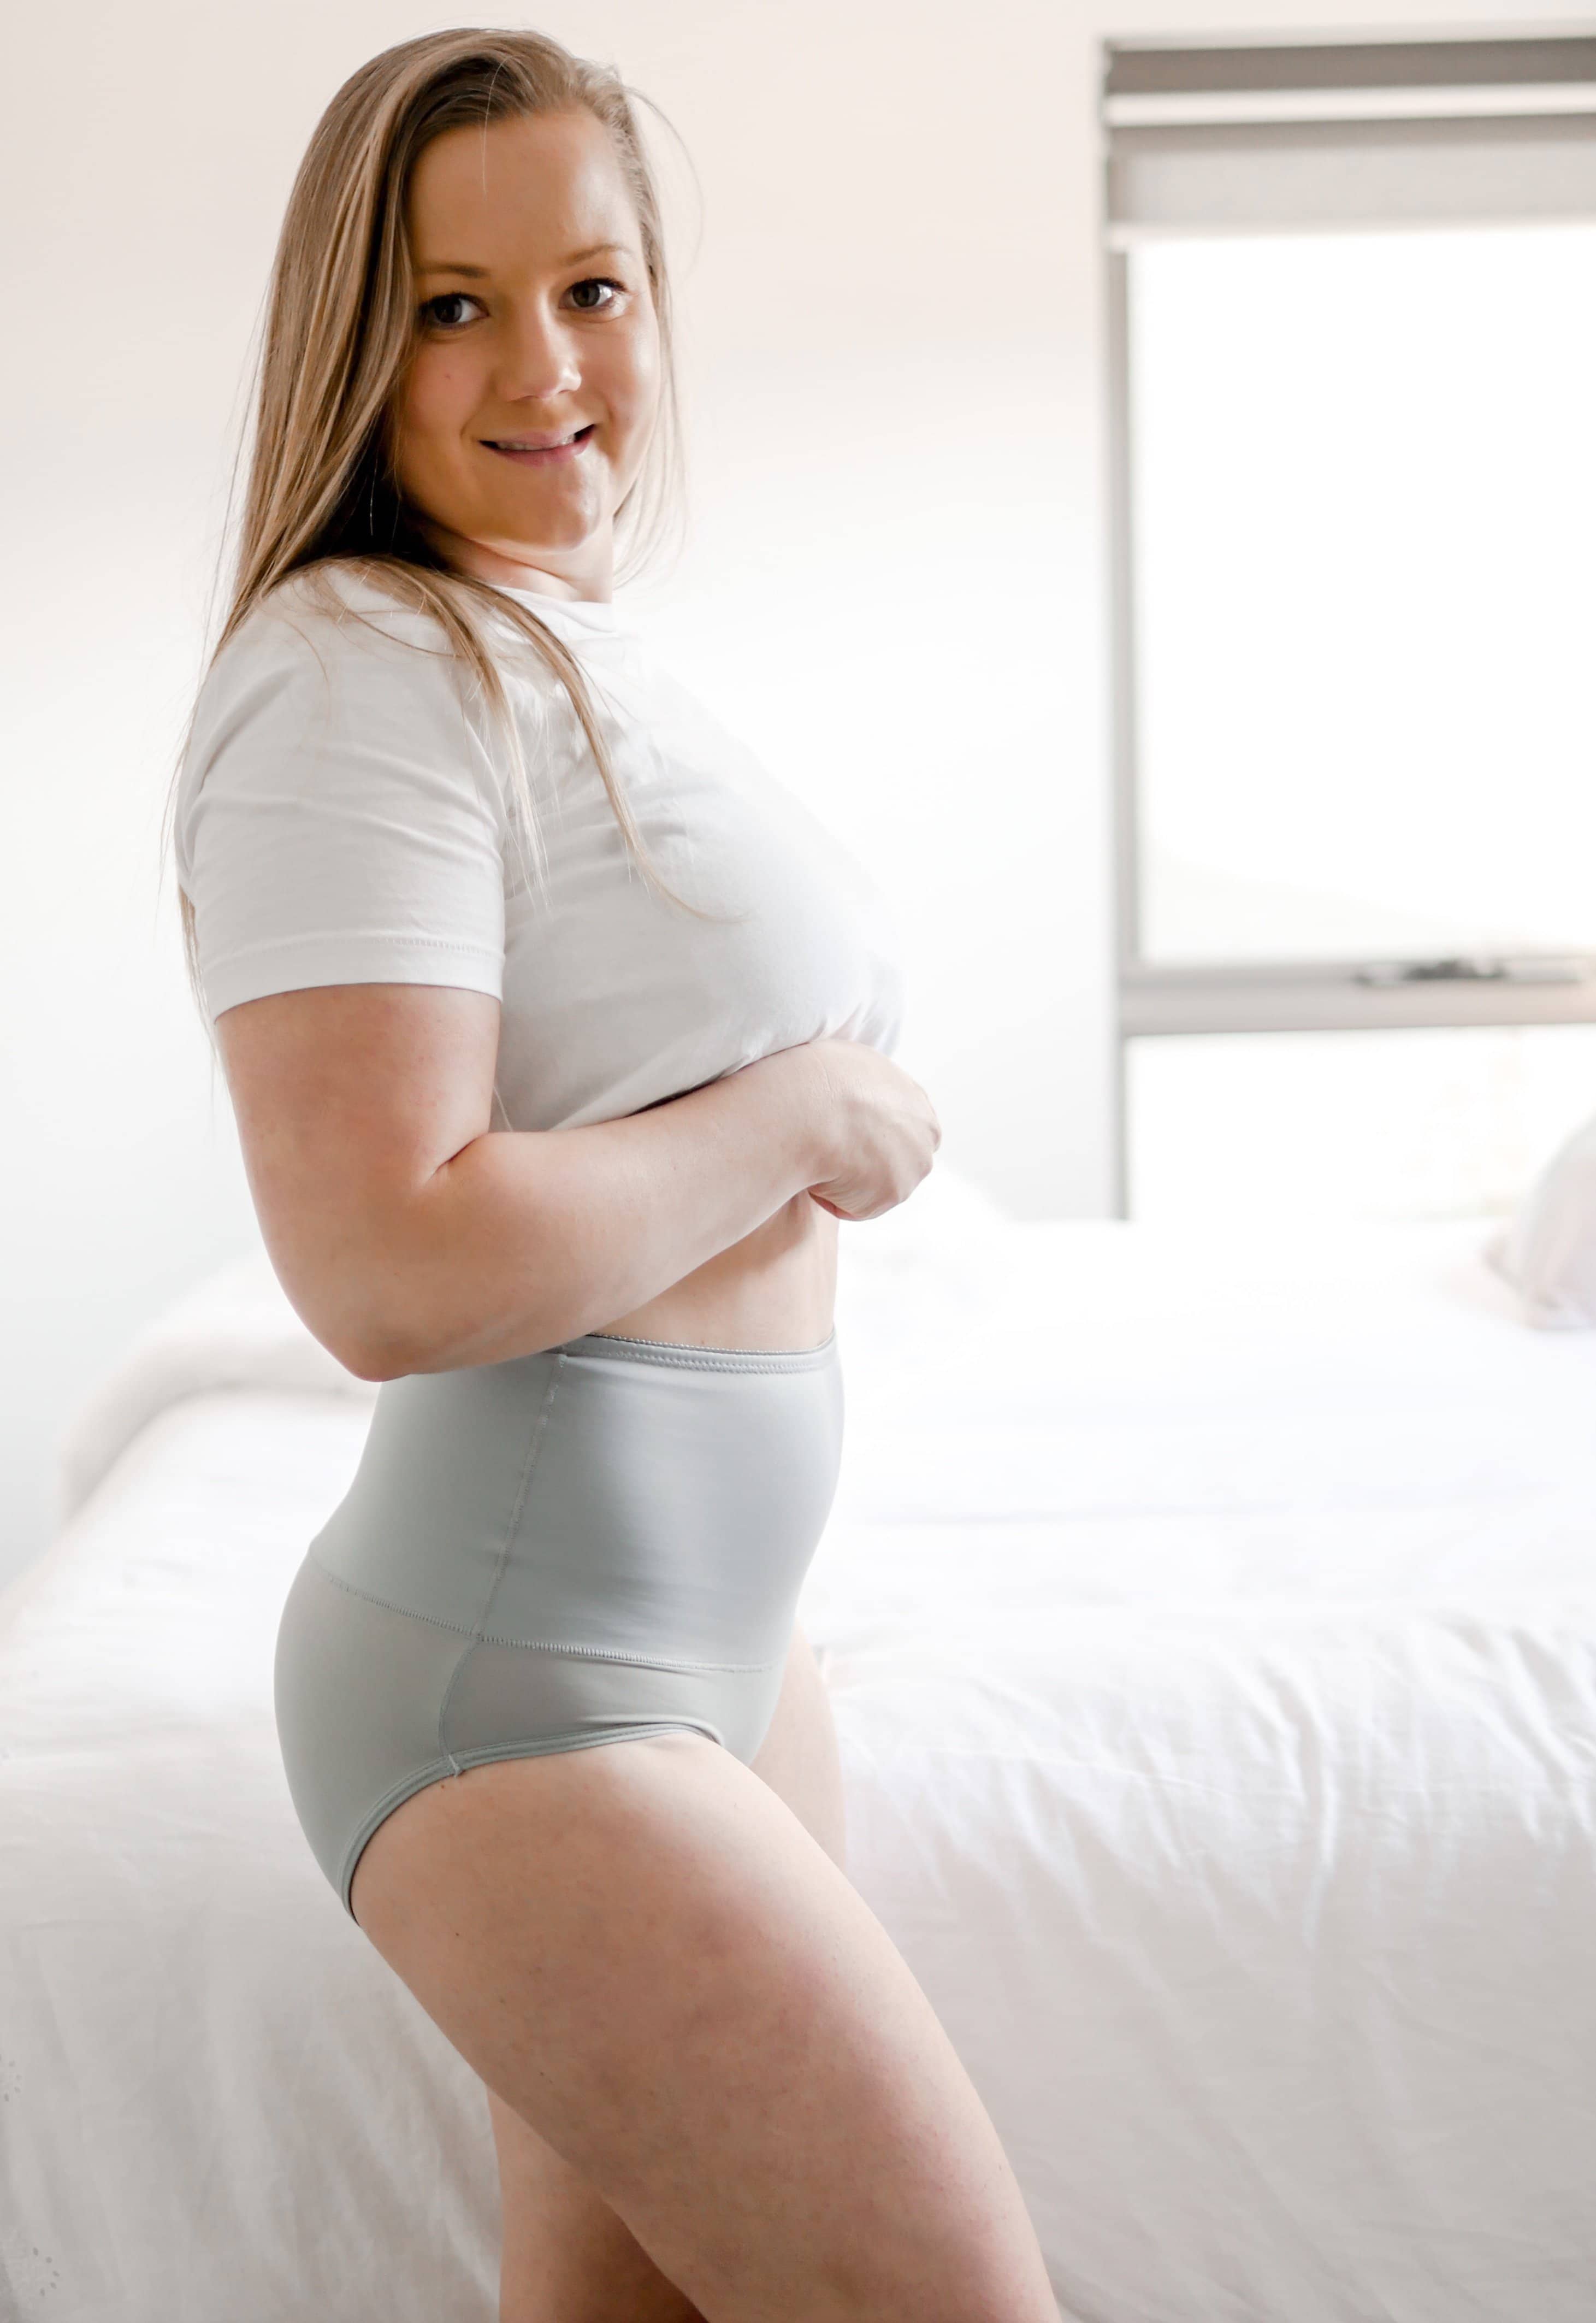 Bump-Friendly Maternity Underwear - Comfort in Every Stage.